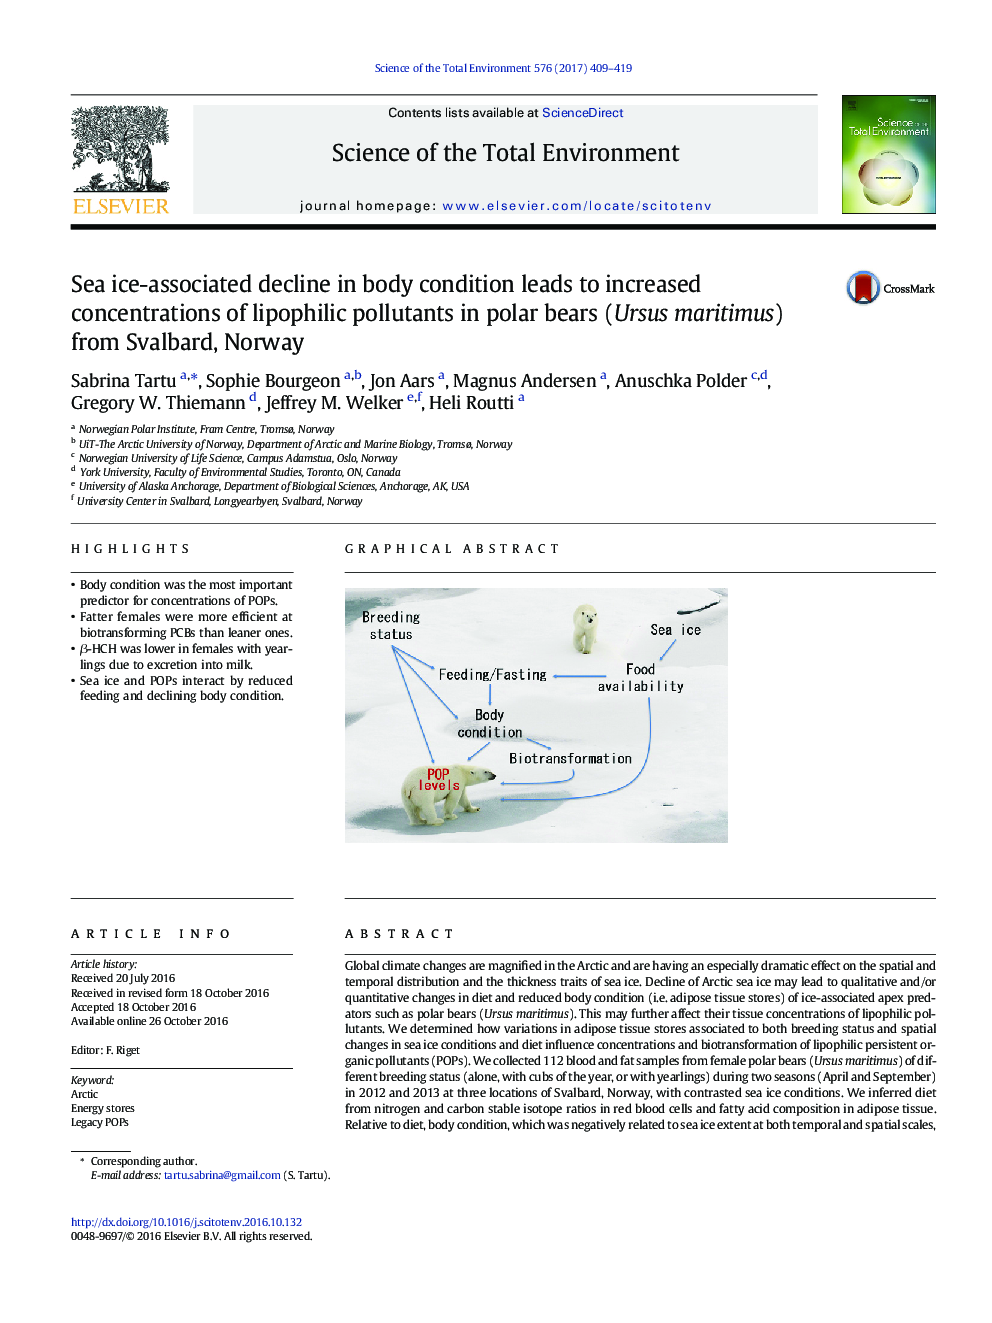 Sea ice-associated decline in body condition leads to increased concentrations of lipophilic pollutants in polar bears (Ursus maritimus) from Svalbard, Norway